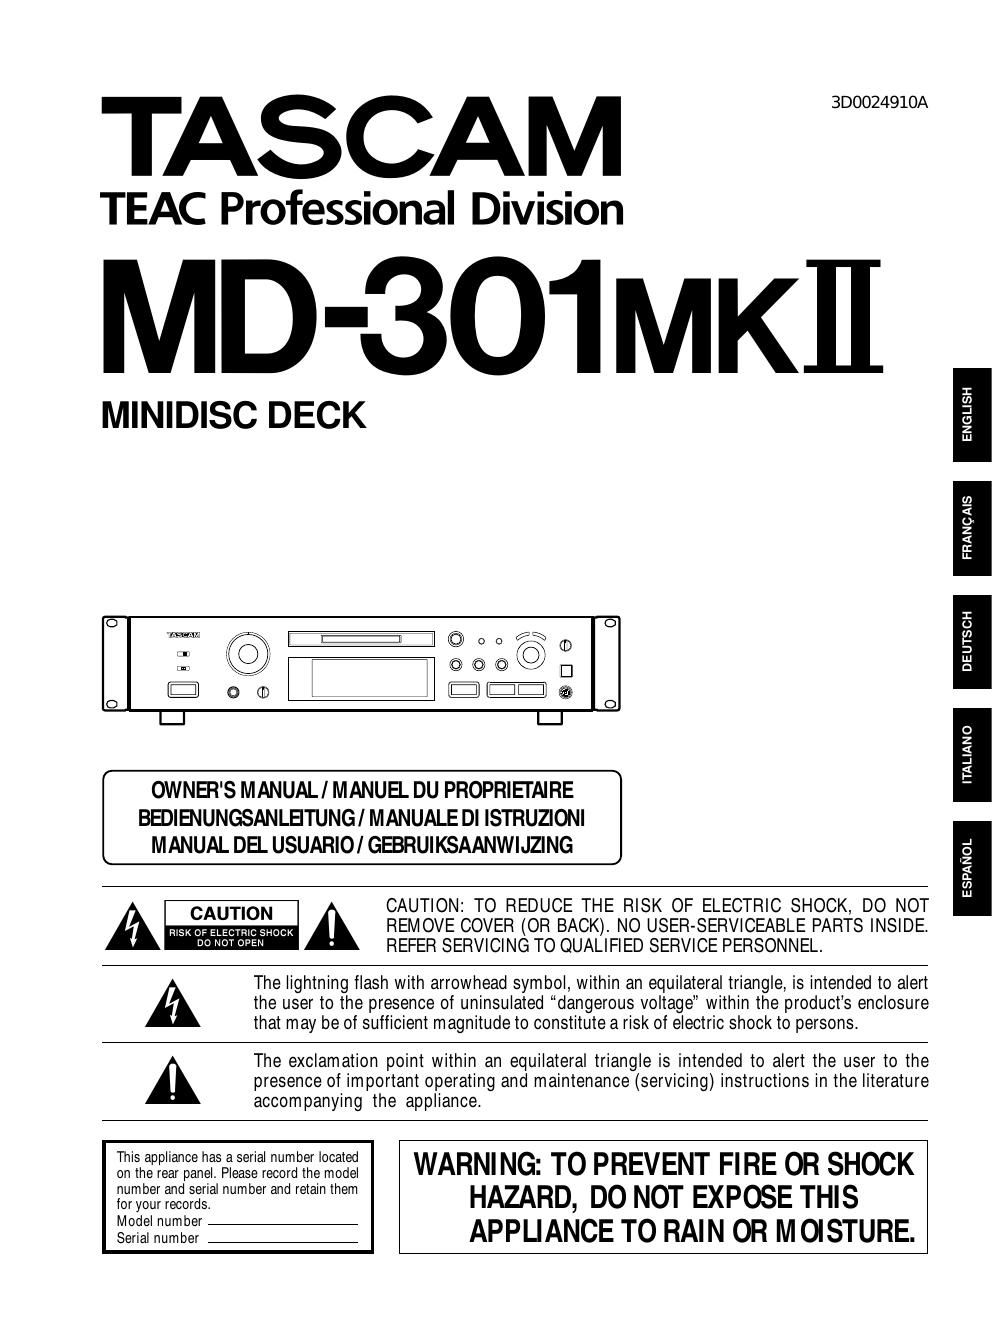 tascam md 301 mk2 owners manual